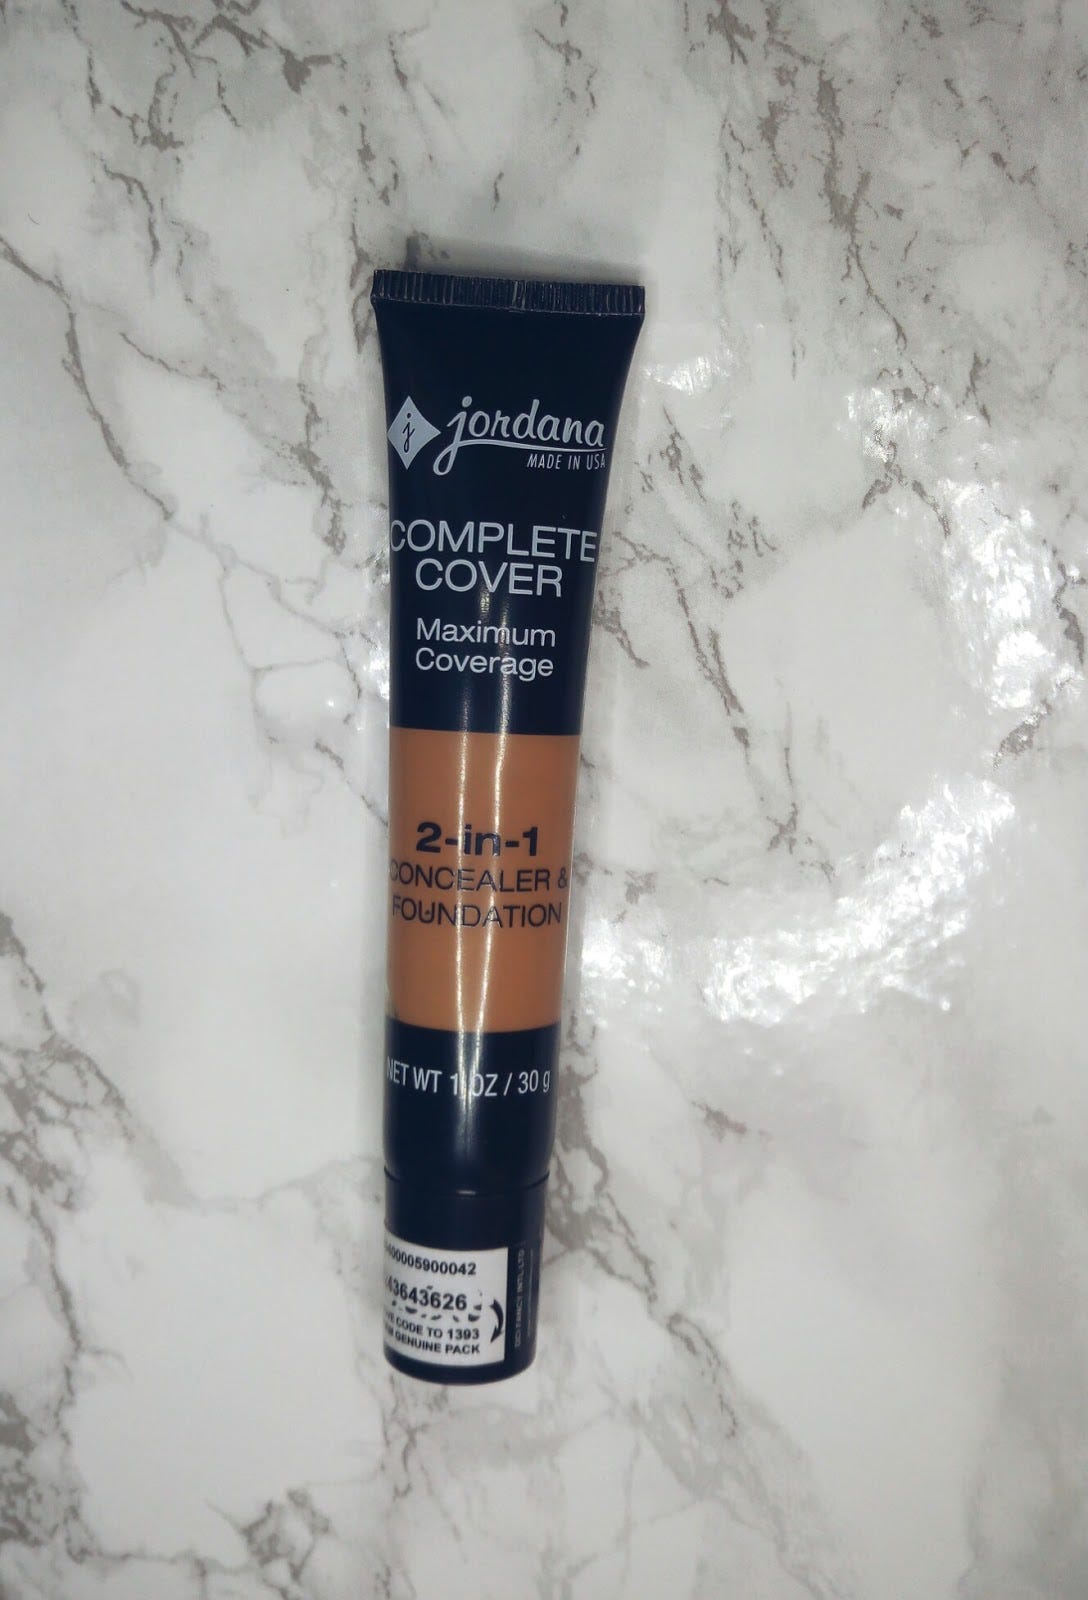 Jordana Complete Cover 2-in-1 Concealer and Foundation Review | by Sike  Gbana | Our Pastiche | Medium